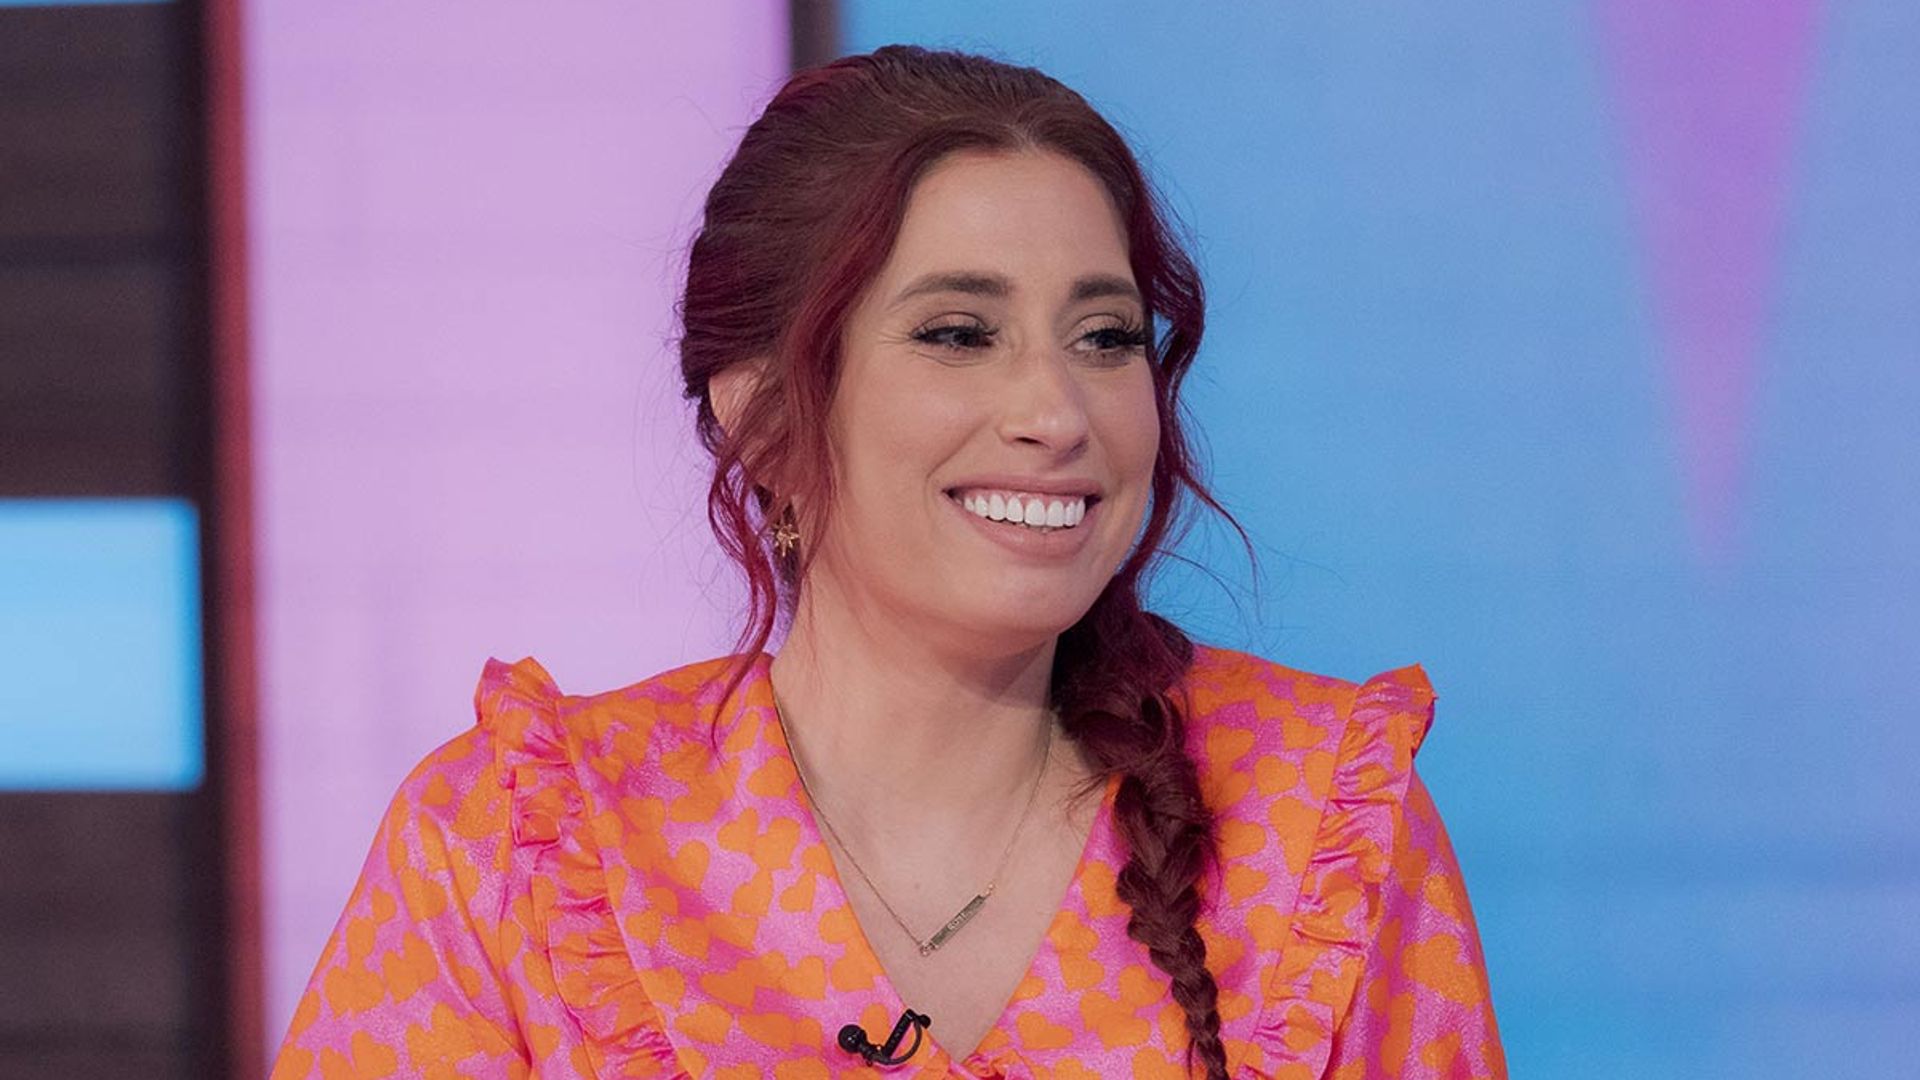 Get a spinning mop like Stacey Solomon in the Amazon spring sale